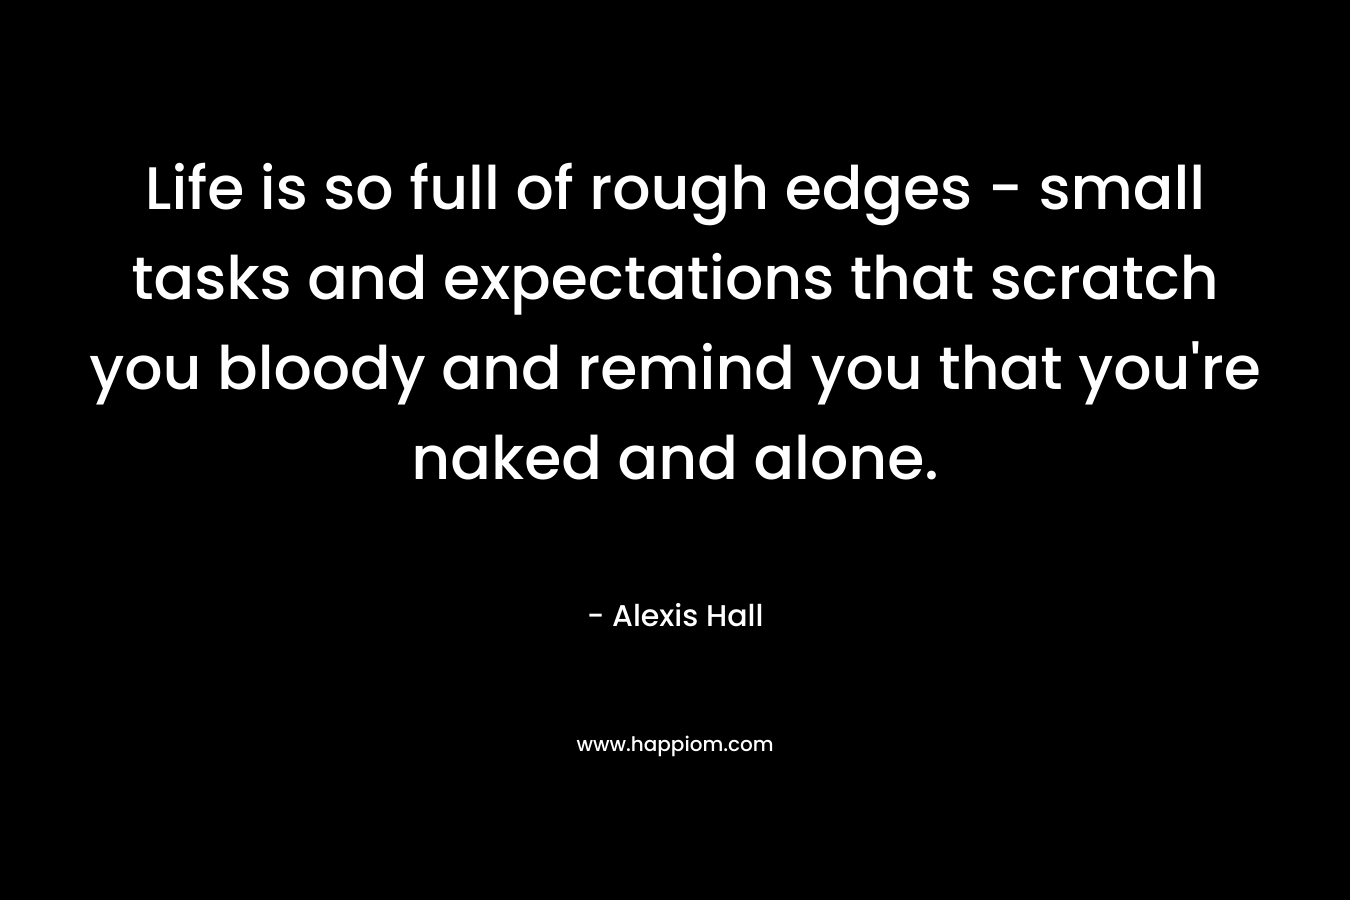 Life is so full of rough edges - small tasks and expectations that scratch you bloody and remind you that you're naked and alone.